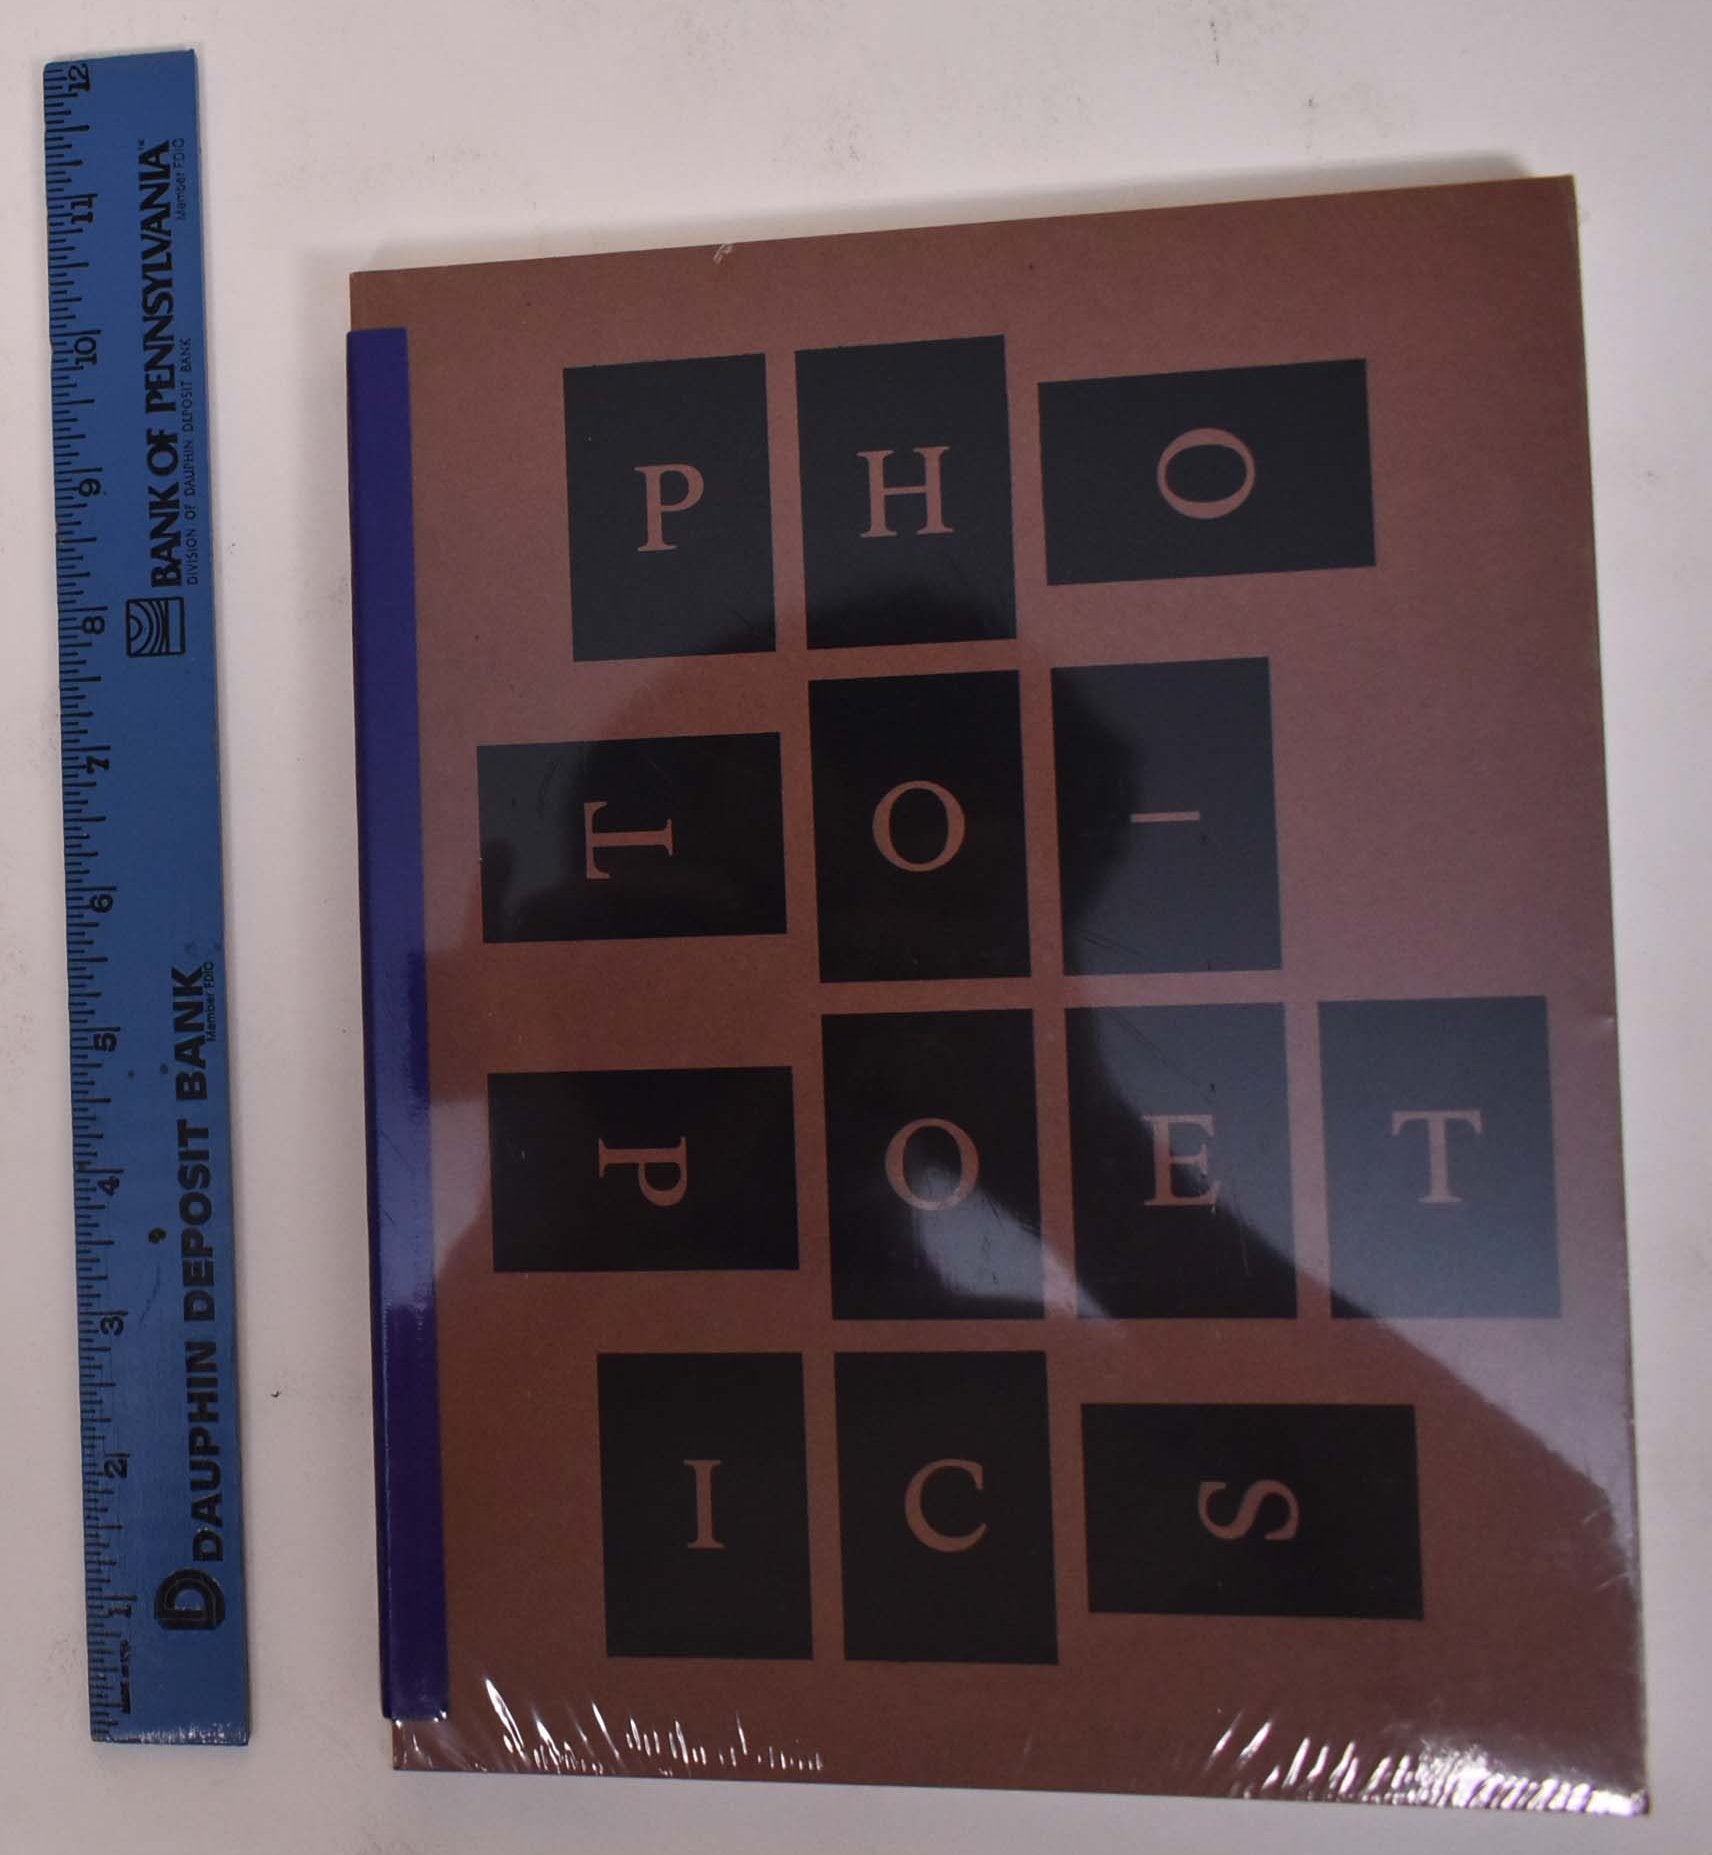 Photo-Poetics: An Anthology by Jennifer Blessing on Mullen Books